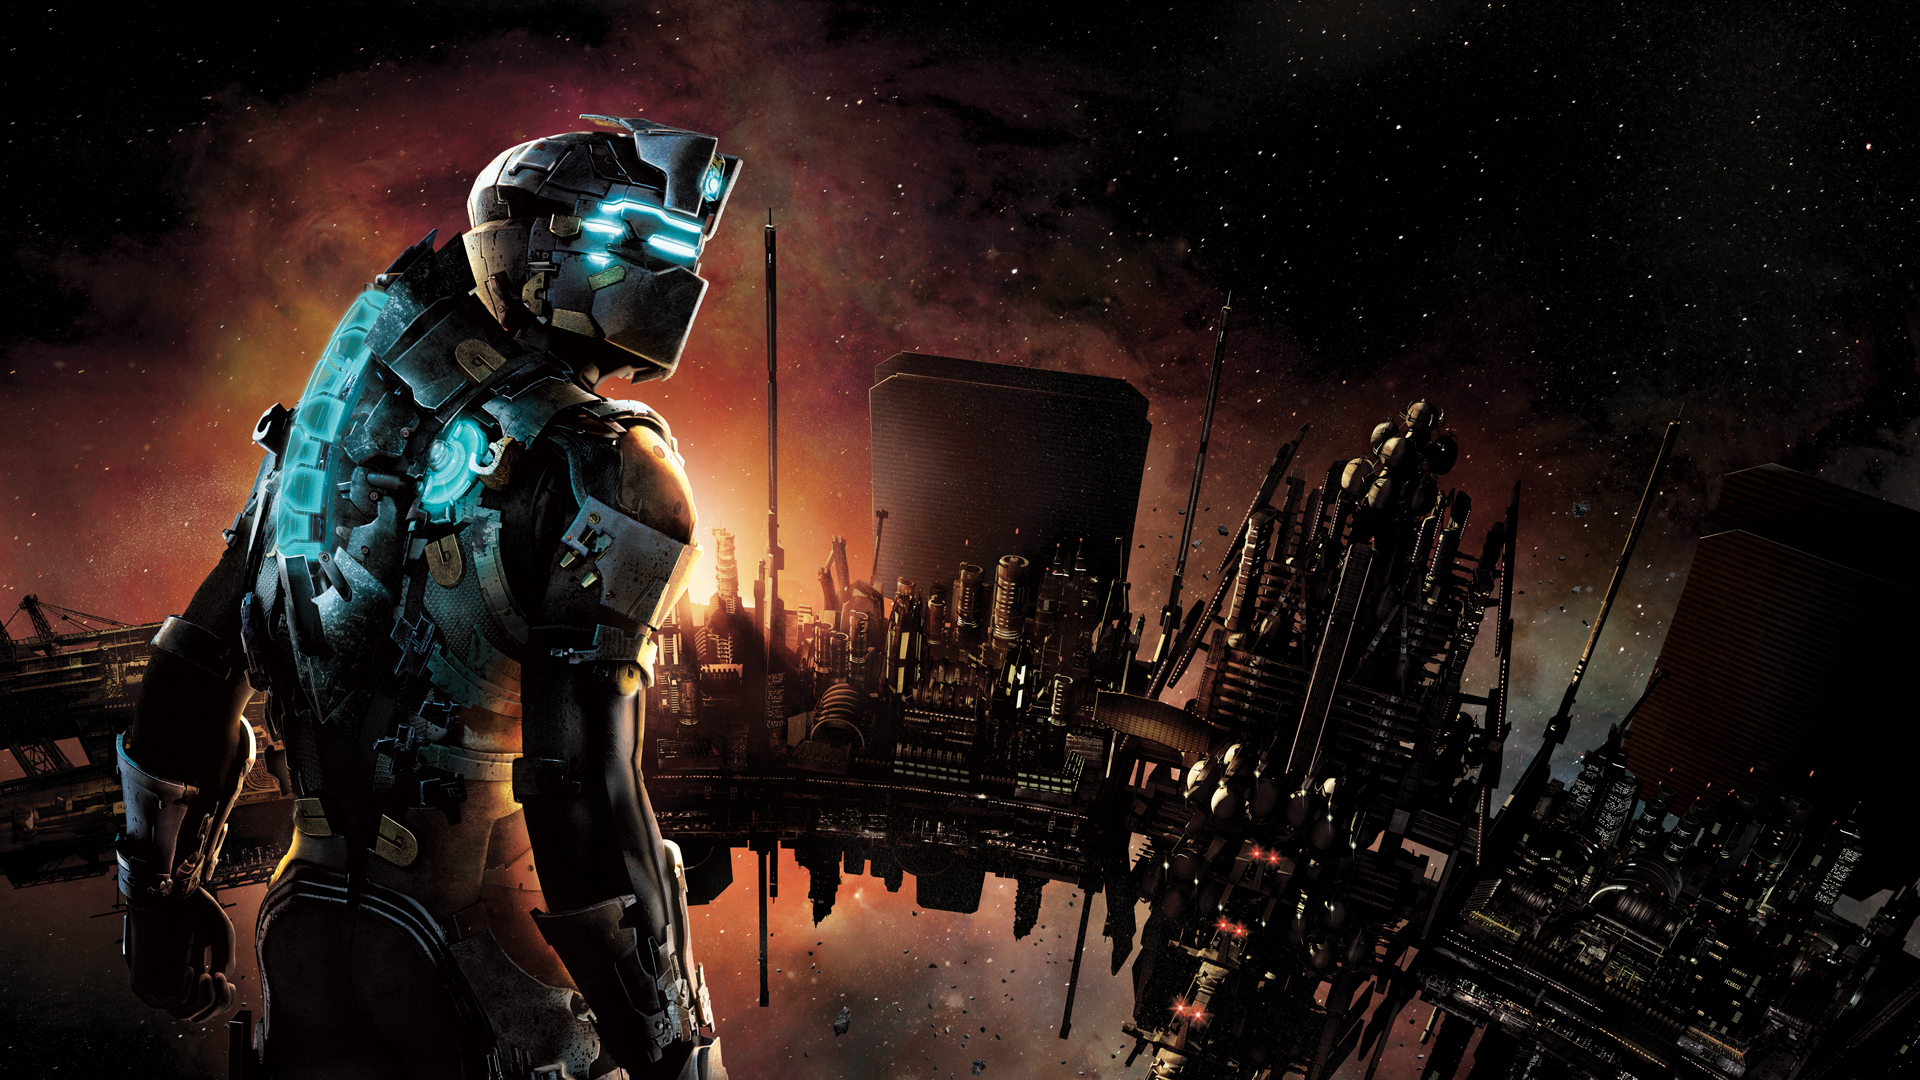 dead space dead space 2 game 1920x1200 Hd wallpaper - User Content - 343  Industries Community Forum